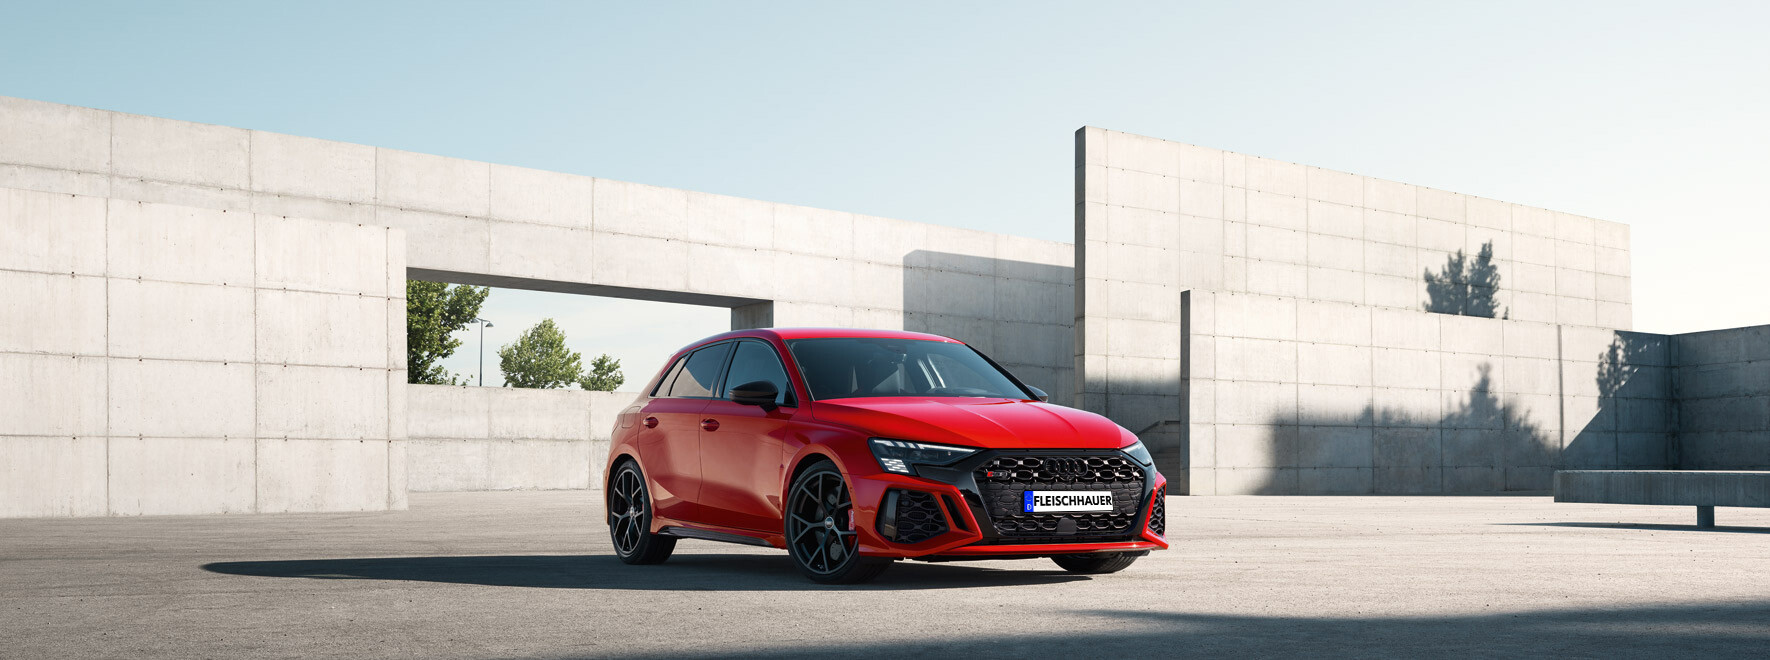 Audi RS 3 Sportback 294 kW (400 PS) S tronic | 